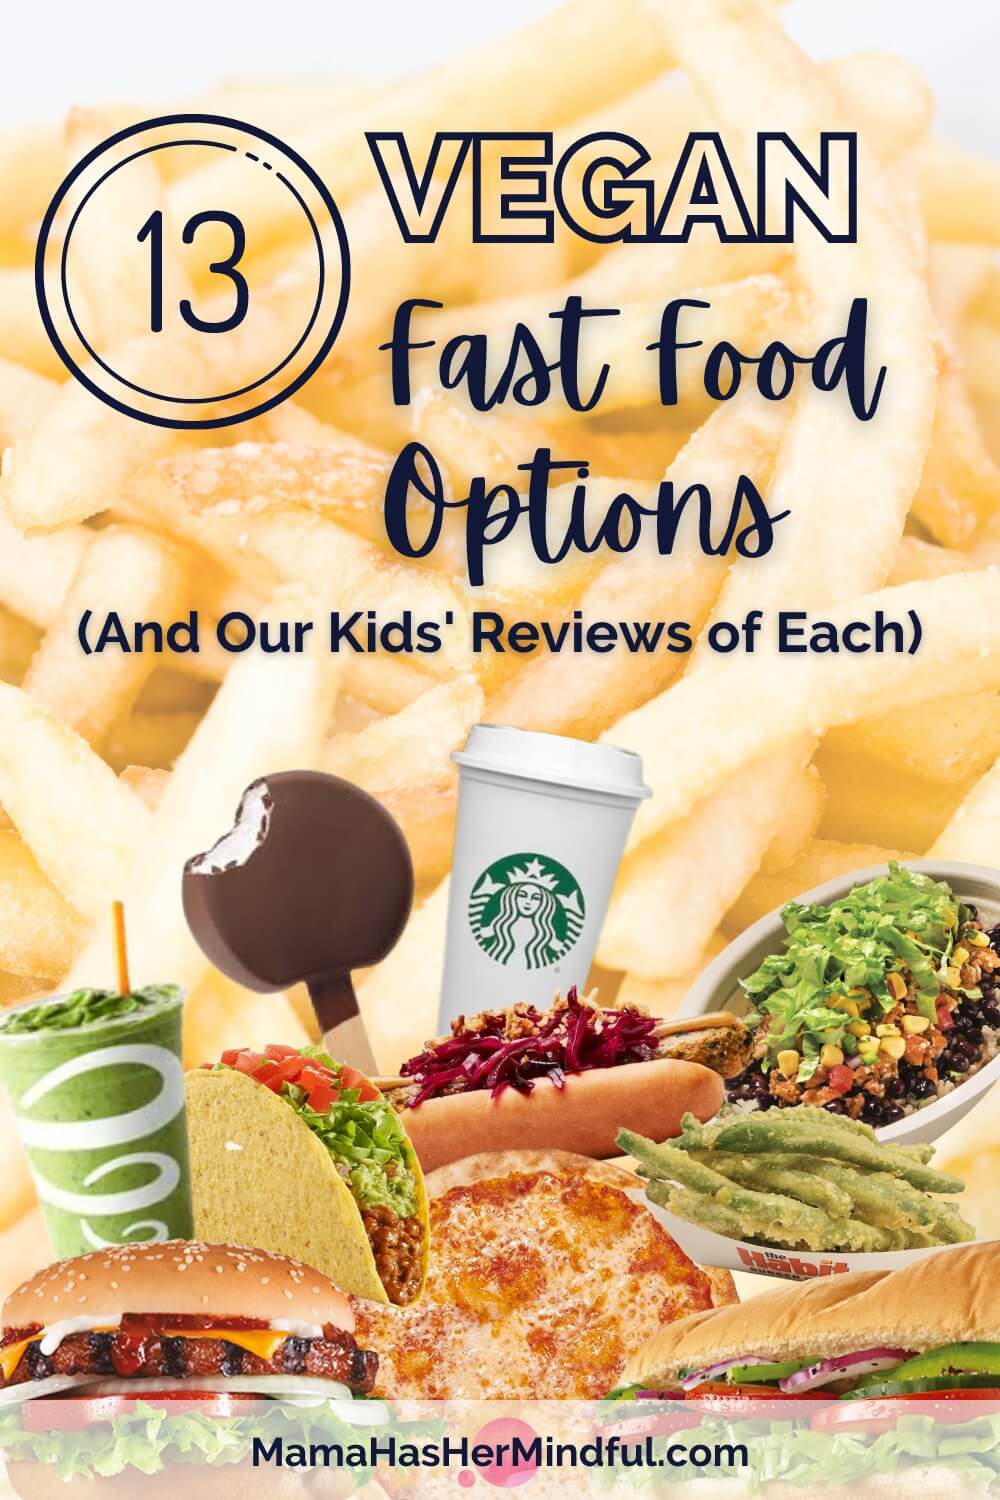 13 Vegan Fast Food Options—and Our Kids’ Reviews of Each